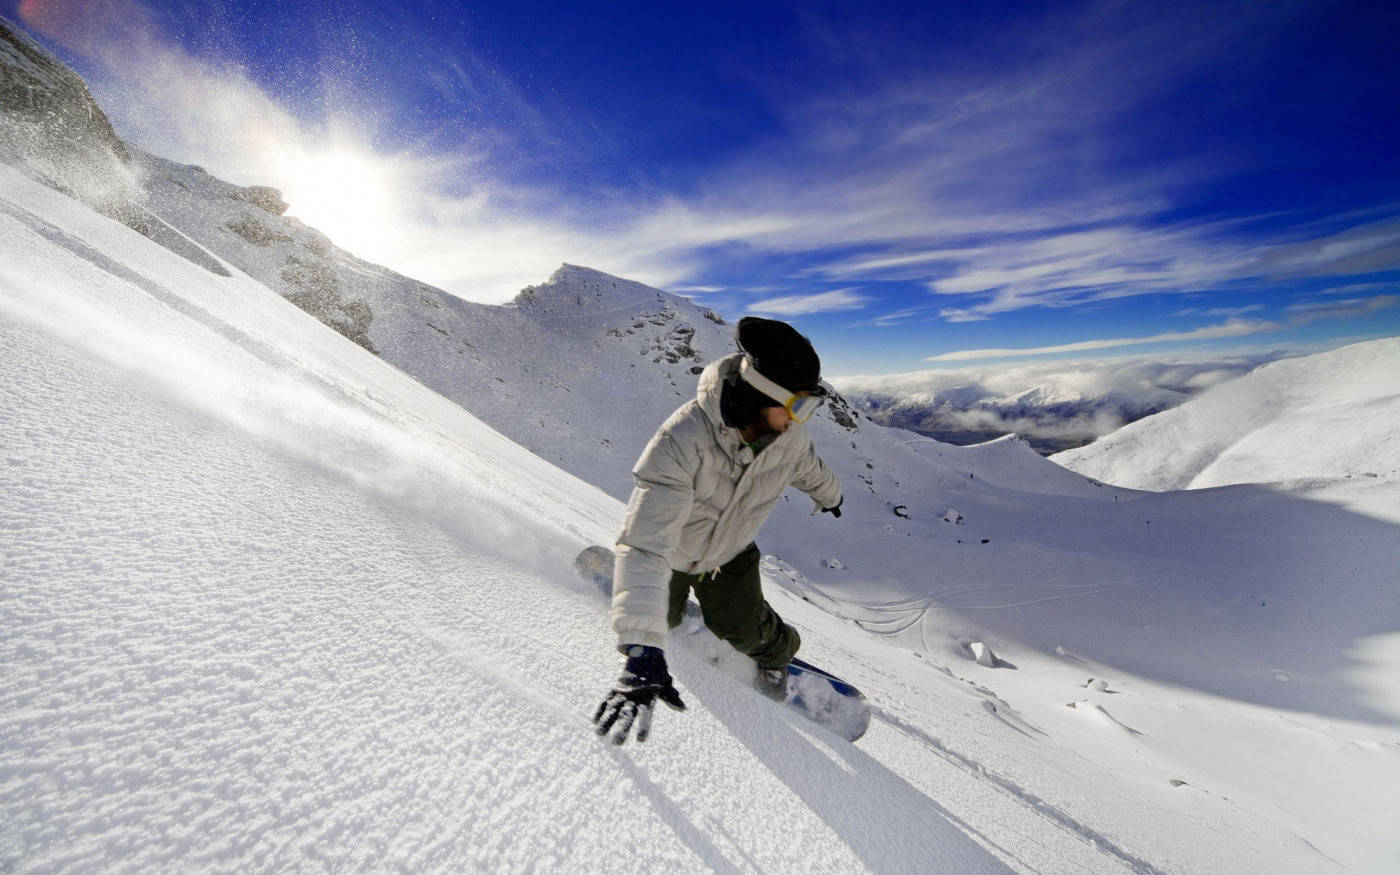 Man In White With Snowboard Descending A Slope Wallpaper